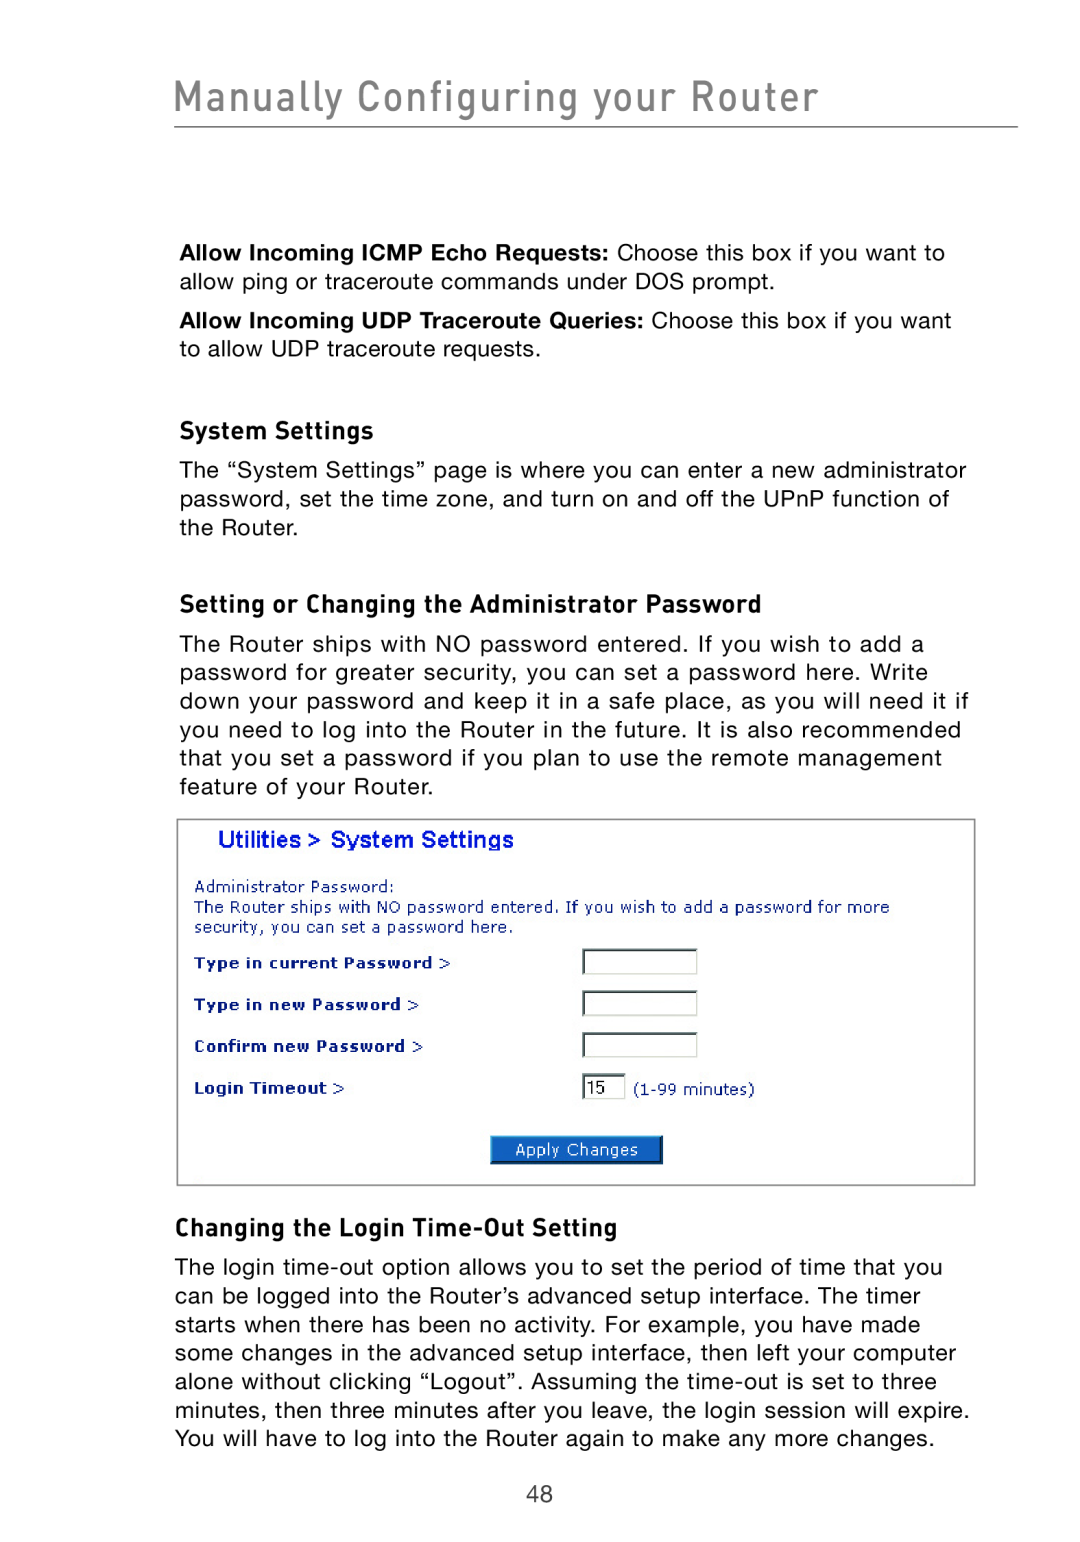 Belkin F5D7632UK4 System Settings, Setting or Changing the Administrator Password, Changing the Login Time-Out Setting 